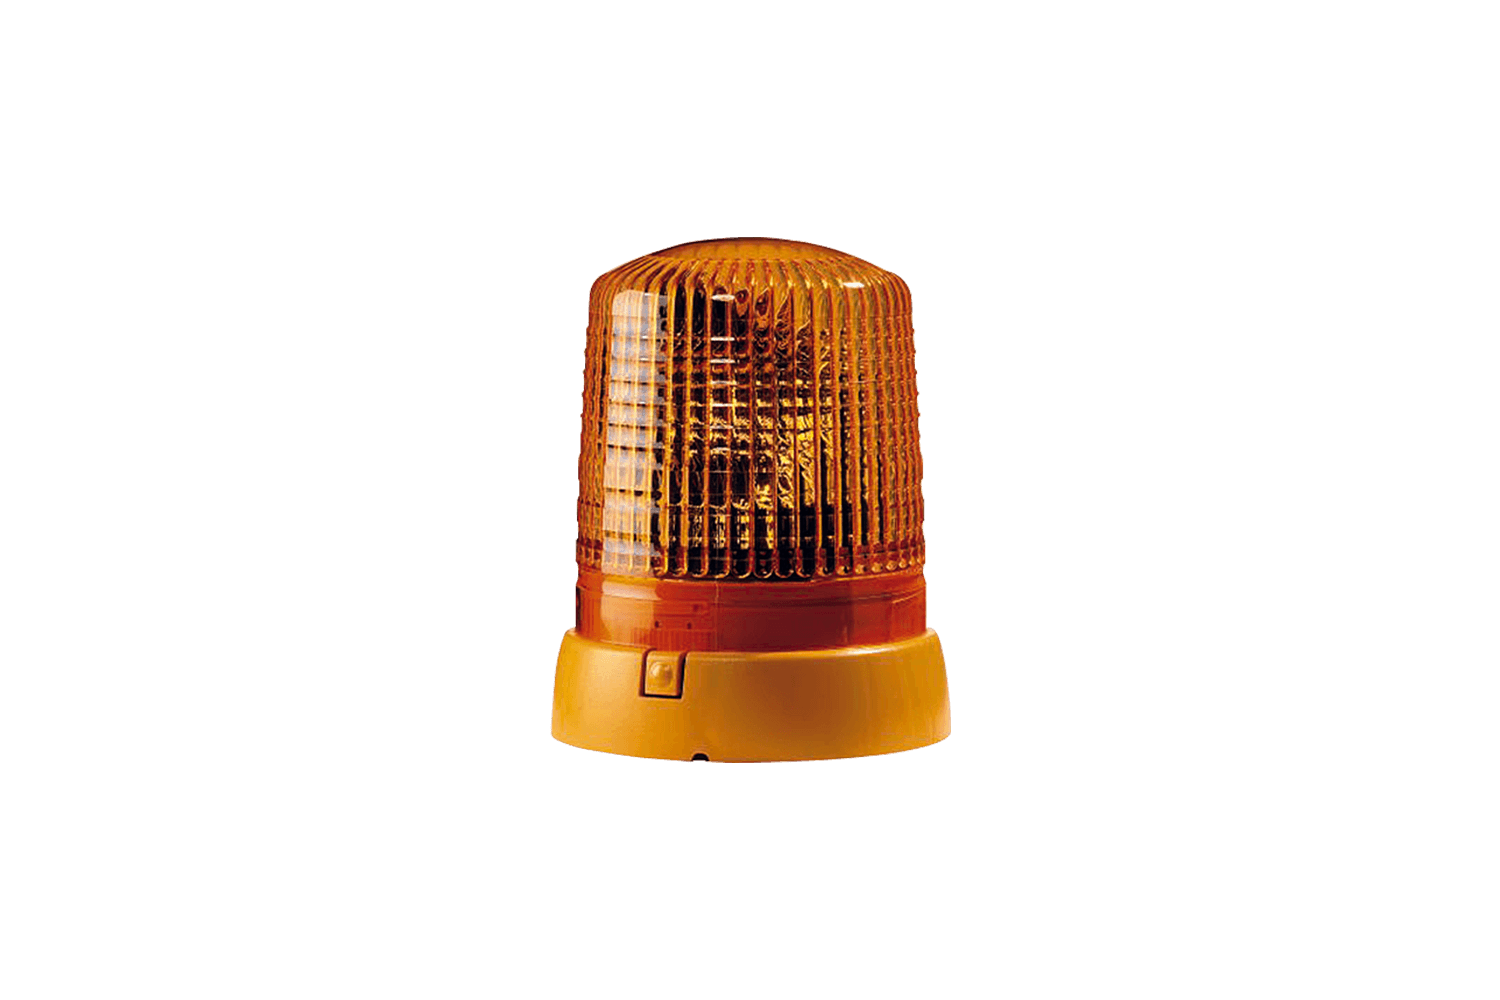 KL 7000 warning lamp from Hella offered by Patlon